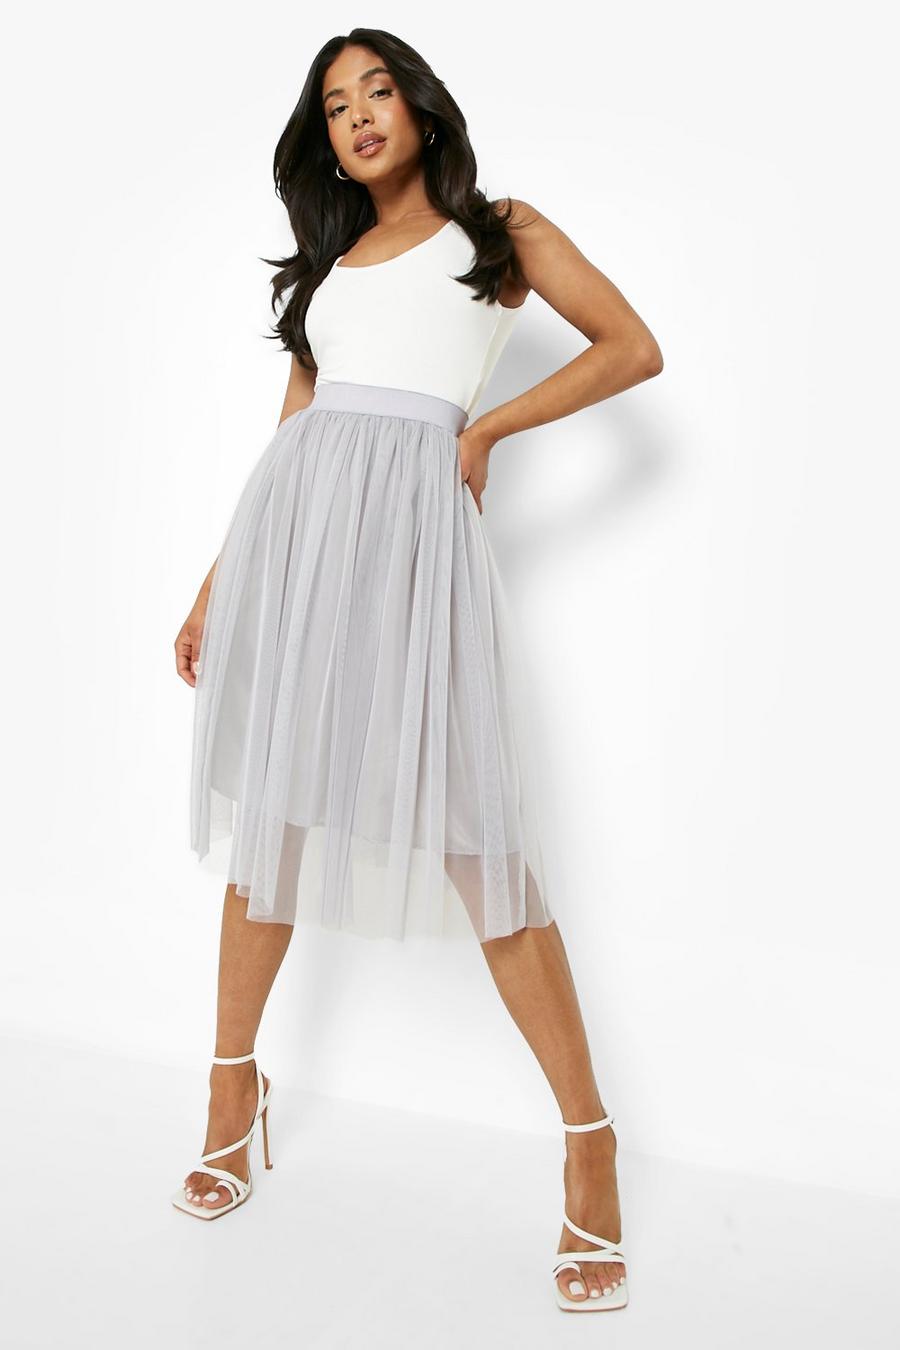 Silver argent Petite Occasion Tulle Mesh Midi Skirt